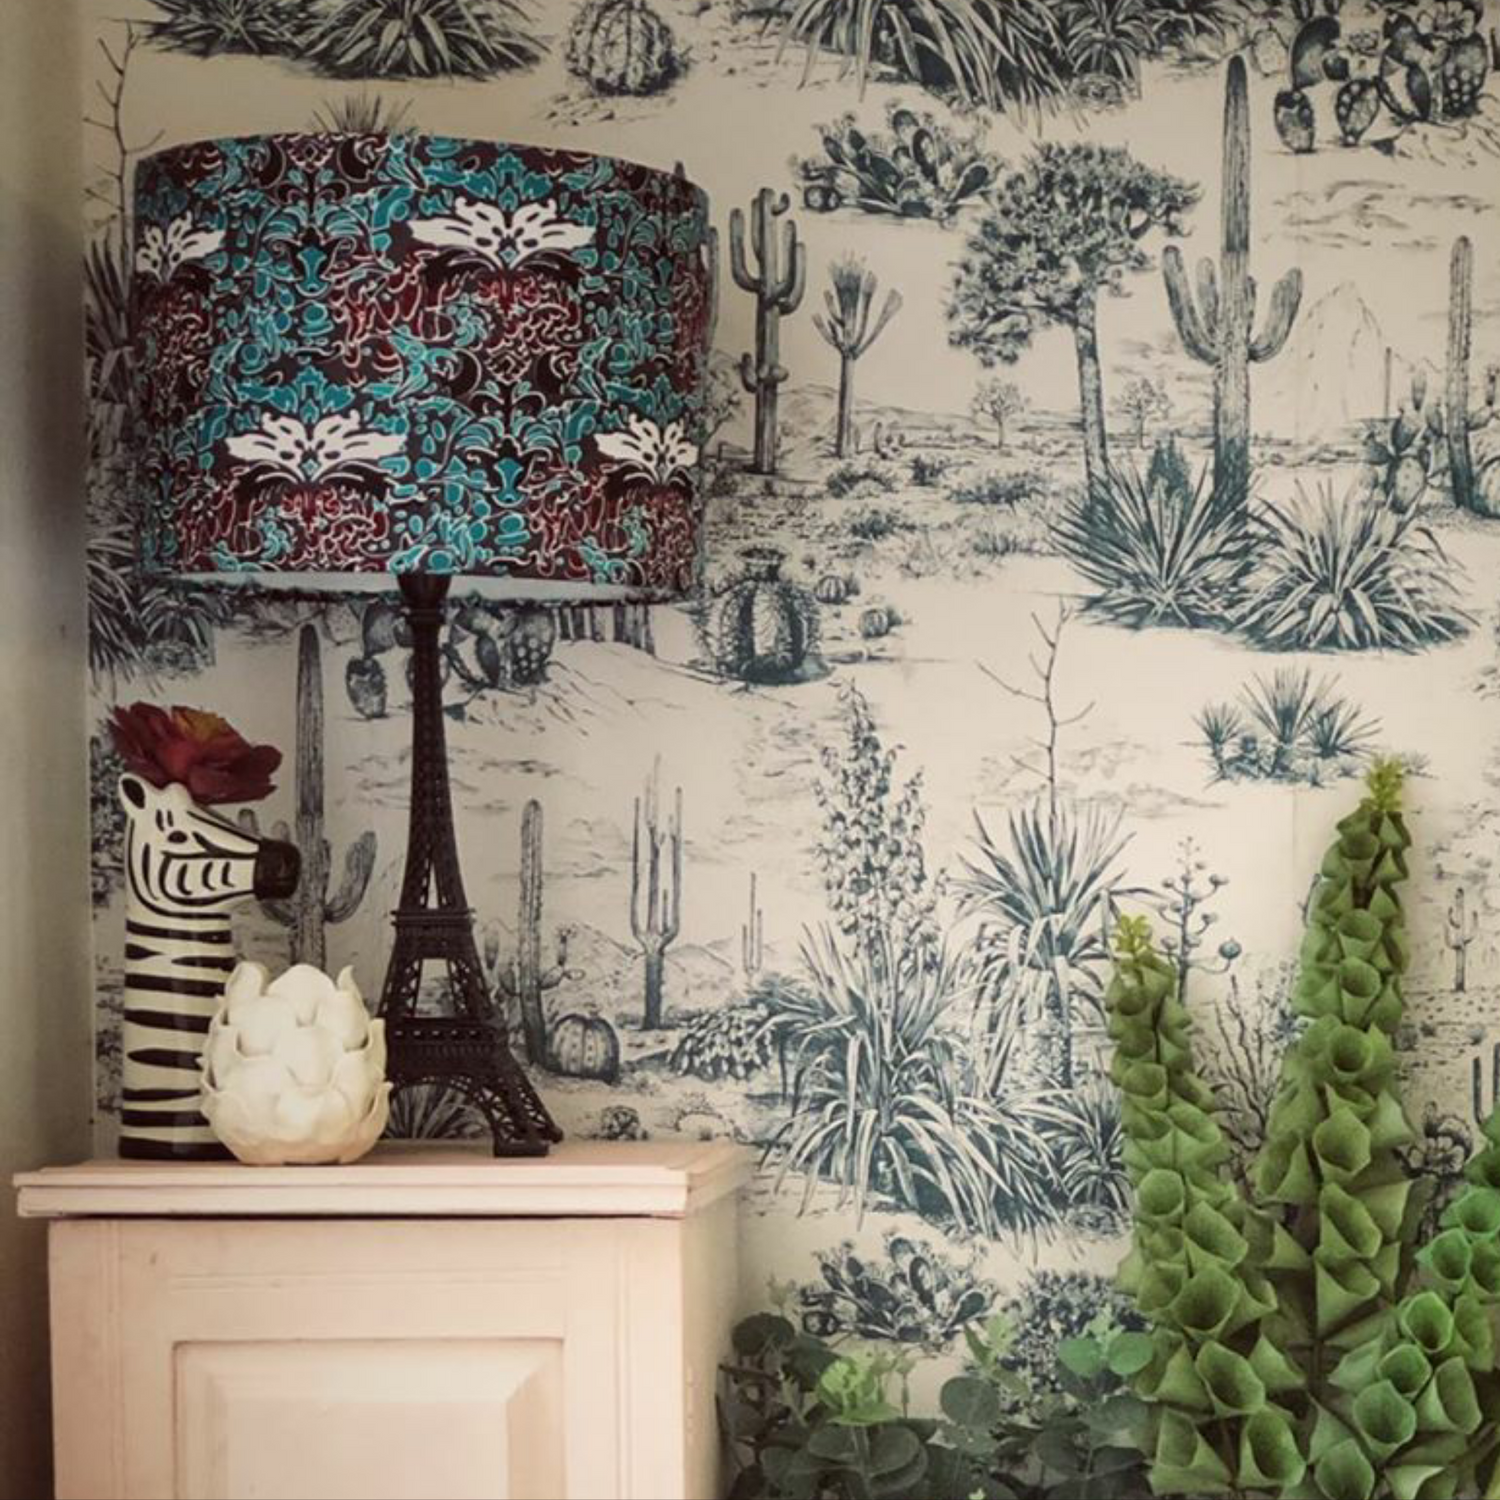 Mint red wine wild west style African drum lampshade sitting on a corner table with other decorative ornaments. It is against a background with a cactus themed botanical wallpaper feature wall. The lampshade is paired with a complimenting sleek black lamp base. 